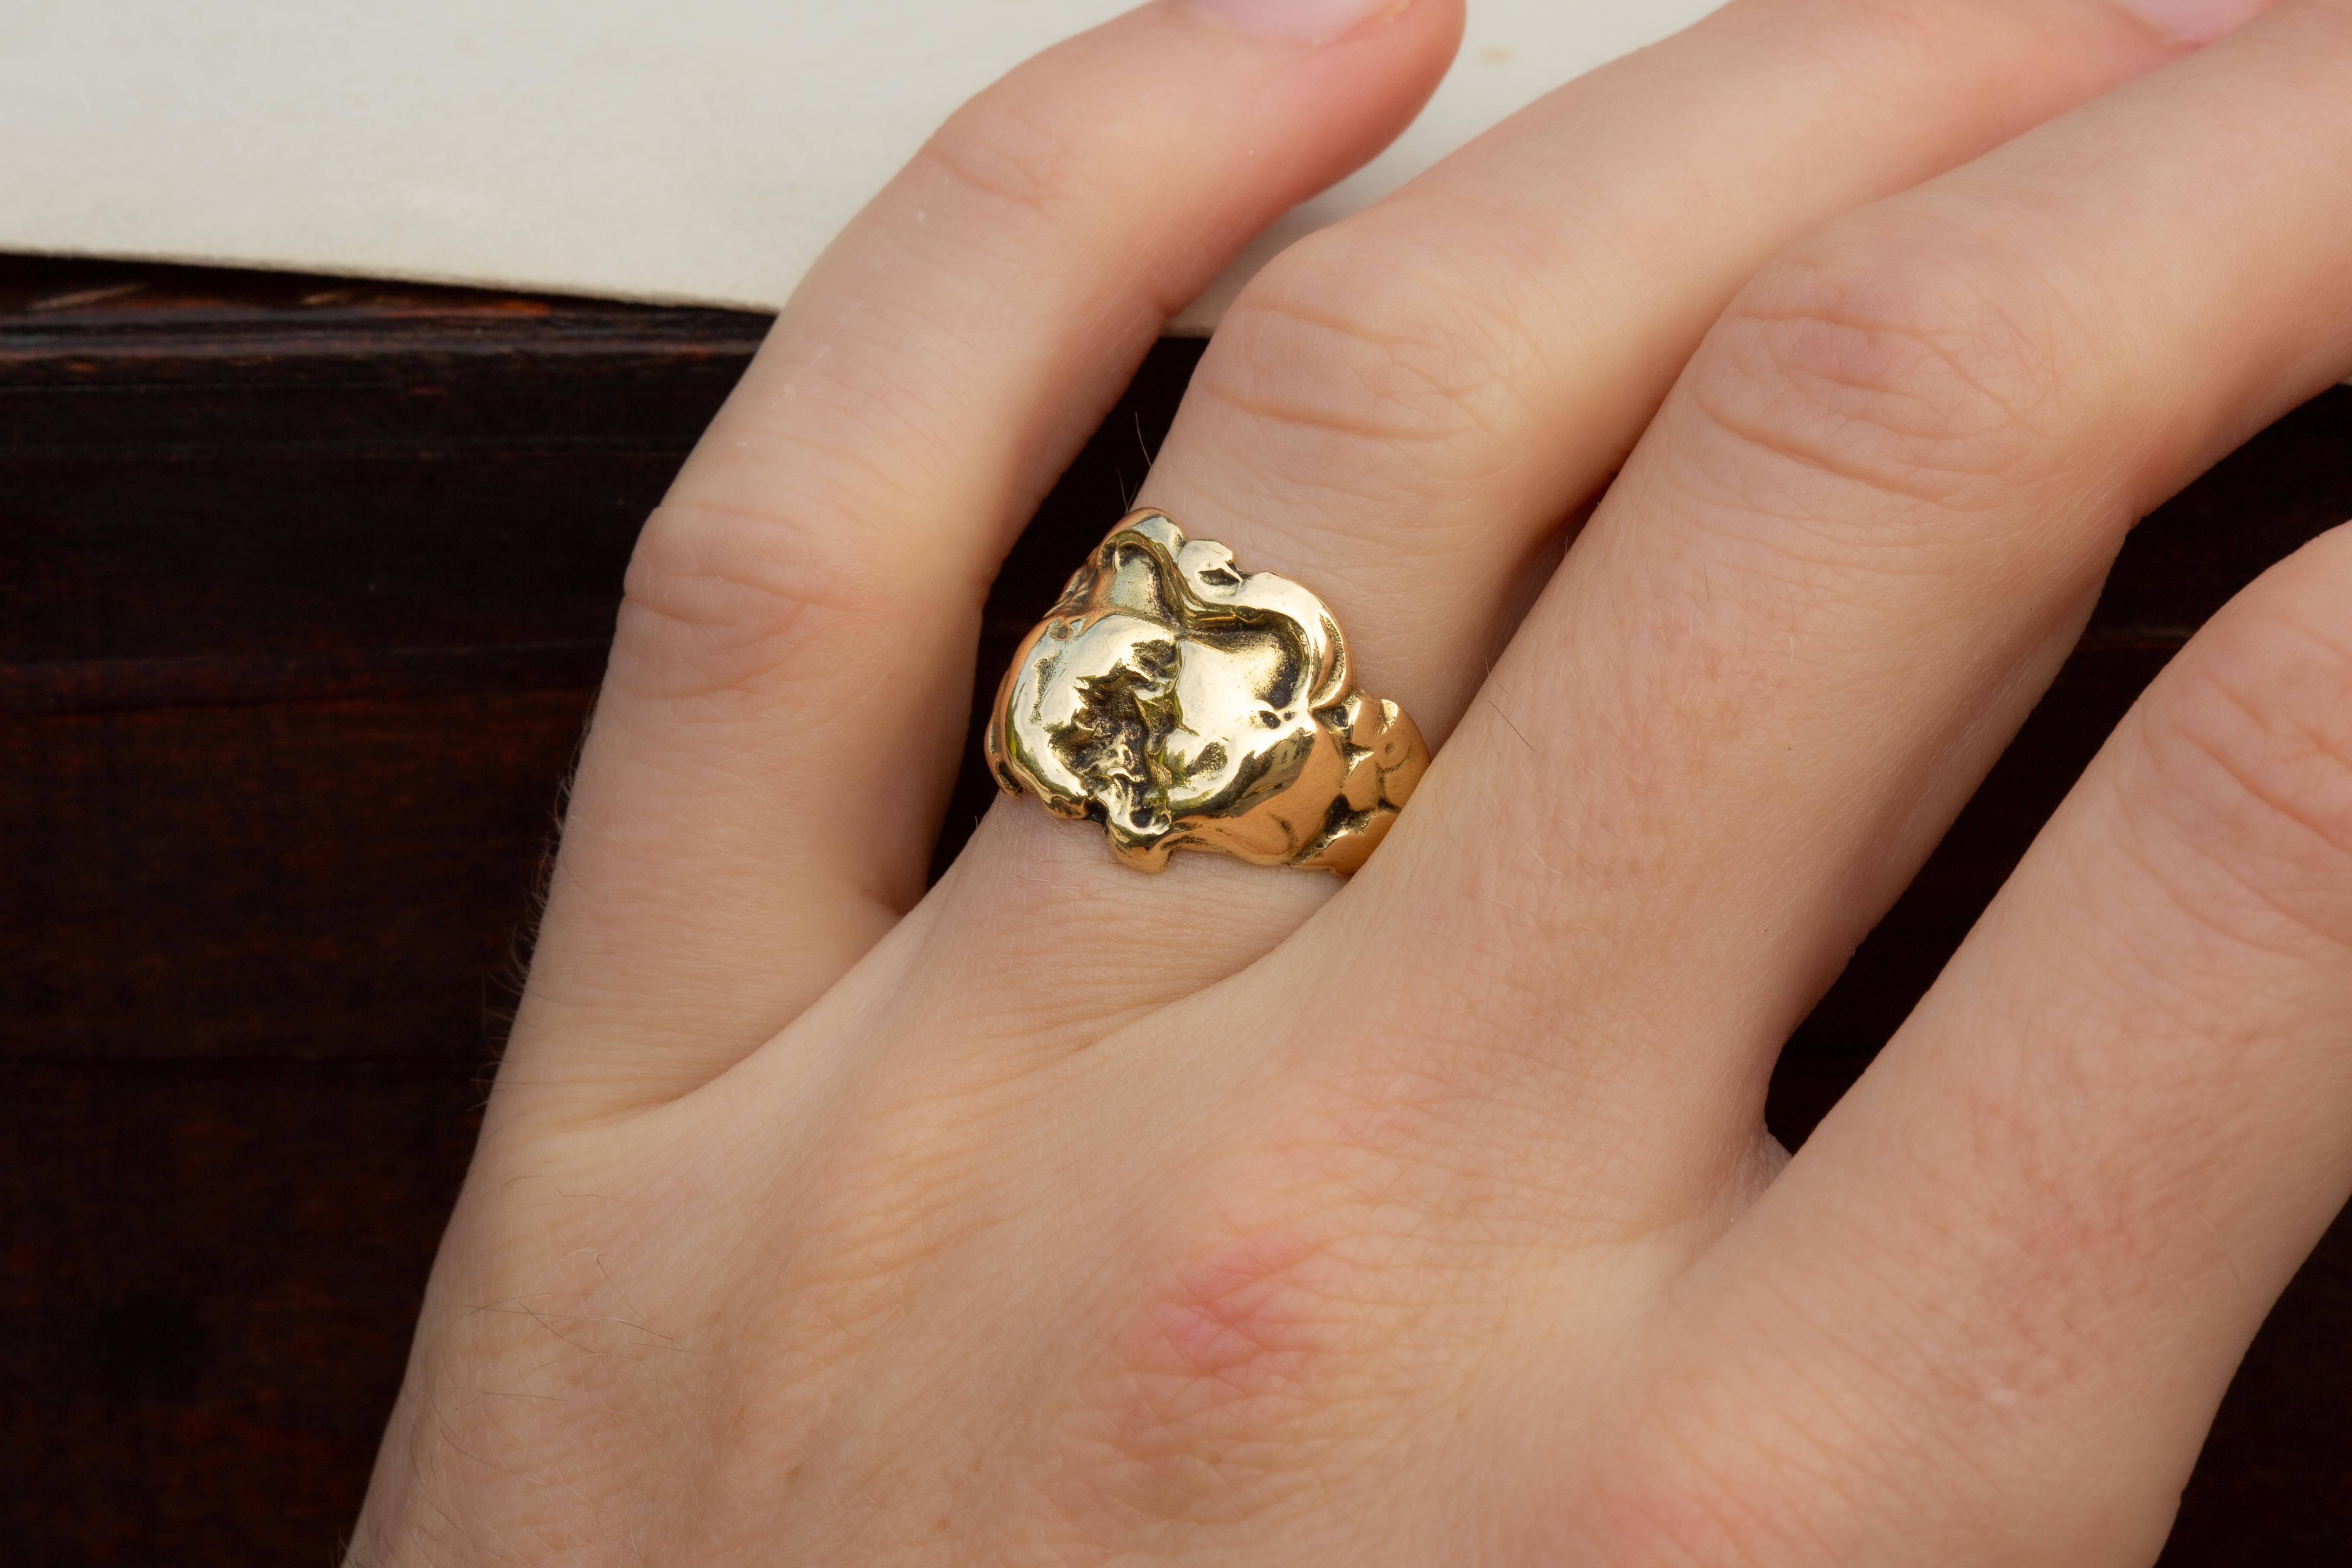  French Antique Art Nouveau 18K Gold Ethereal Figural Kissing Ring c.1910 9